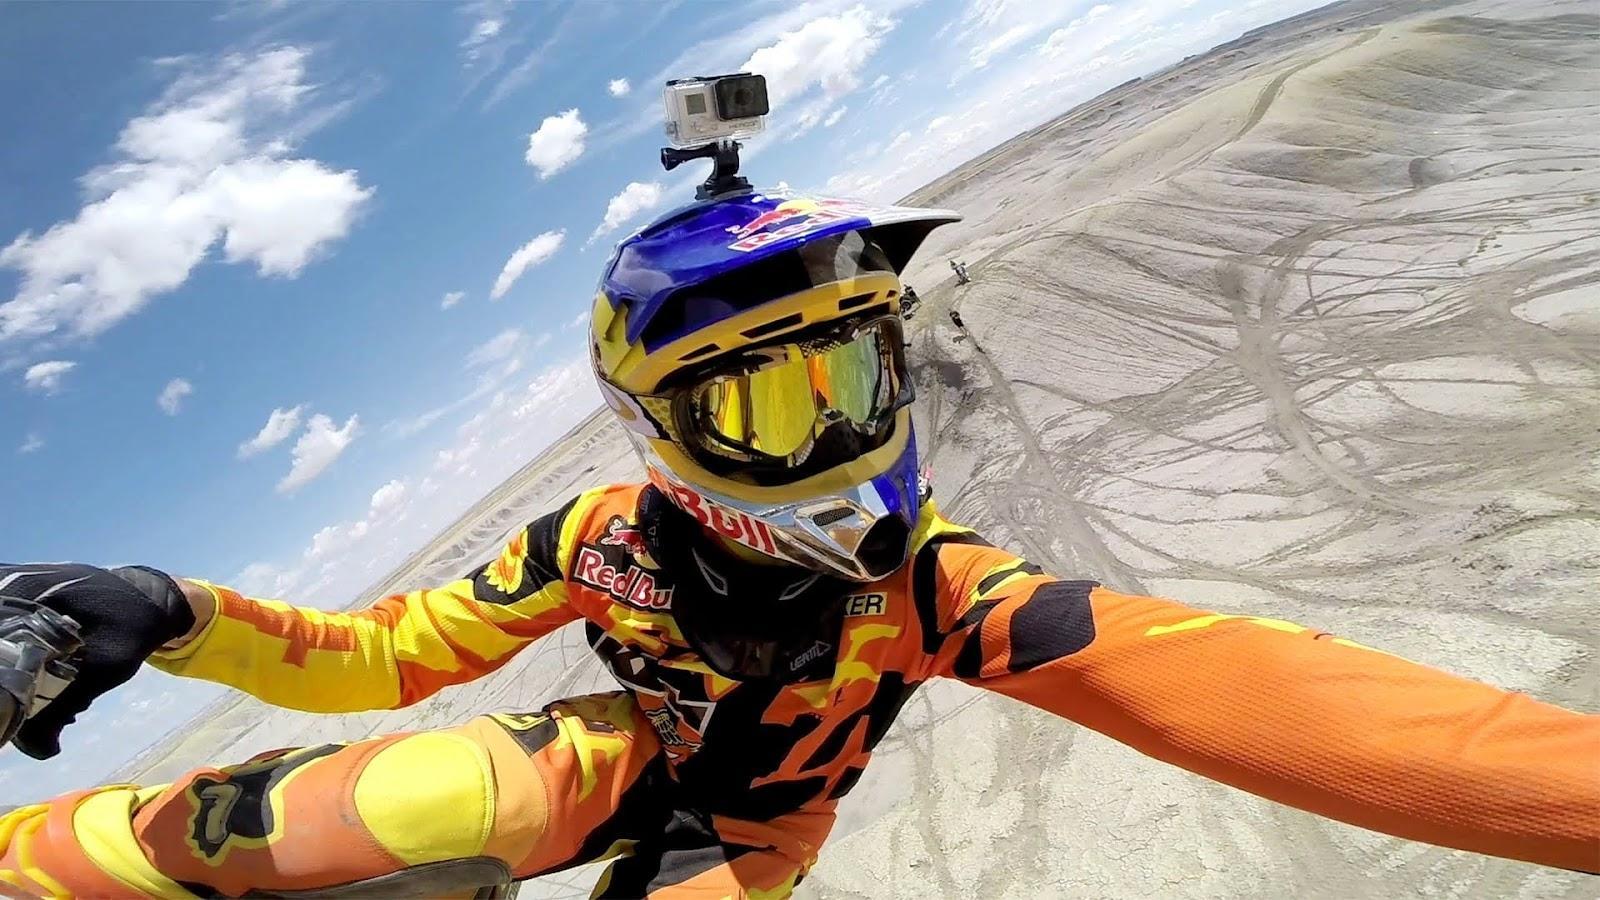 GoPro and Redbull have a partnership to cater to the energy drinking thrill seekers